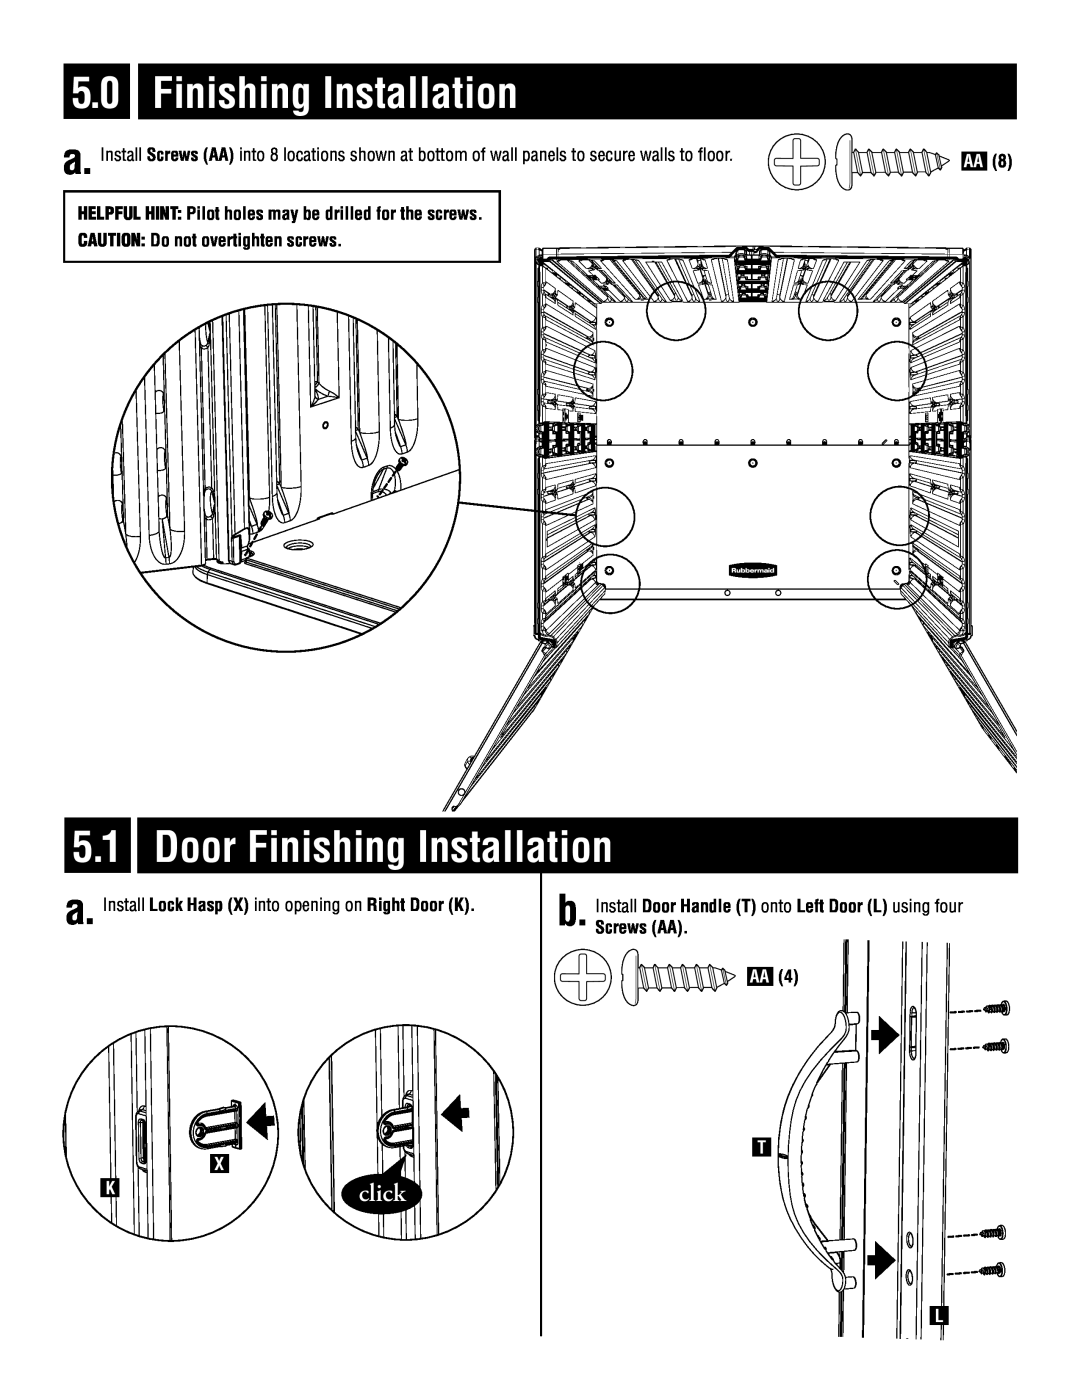 Rubbermaid 5L20 Door Finishing Installation, click, HELPFUL HINT Pilot holes may be drilled for the screws, Screws AA 